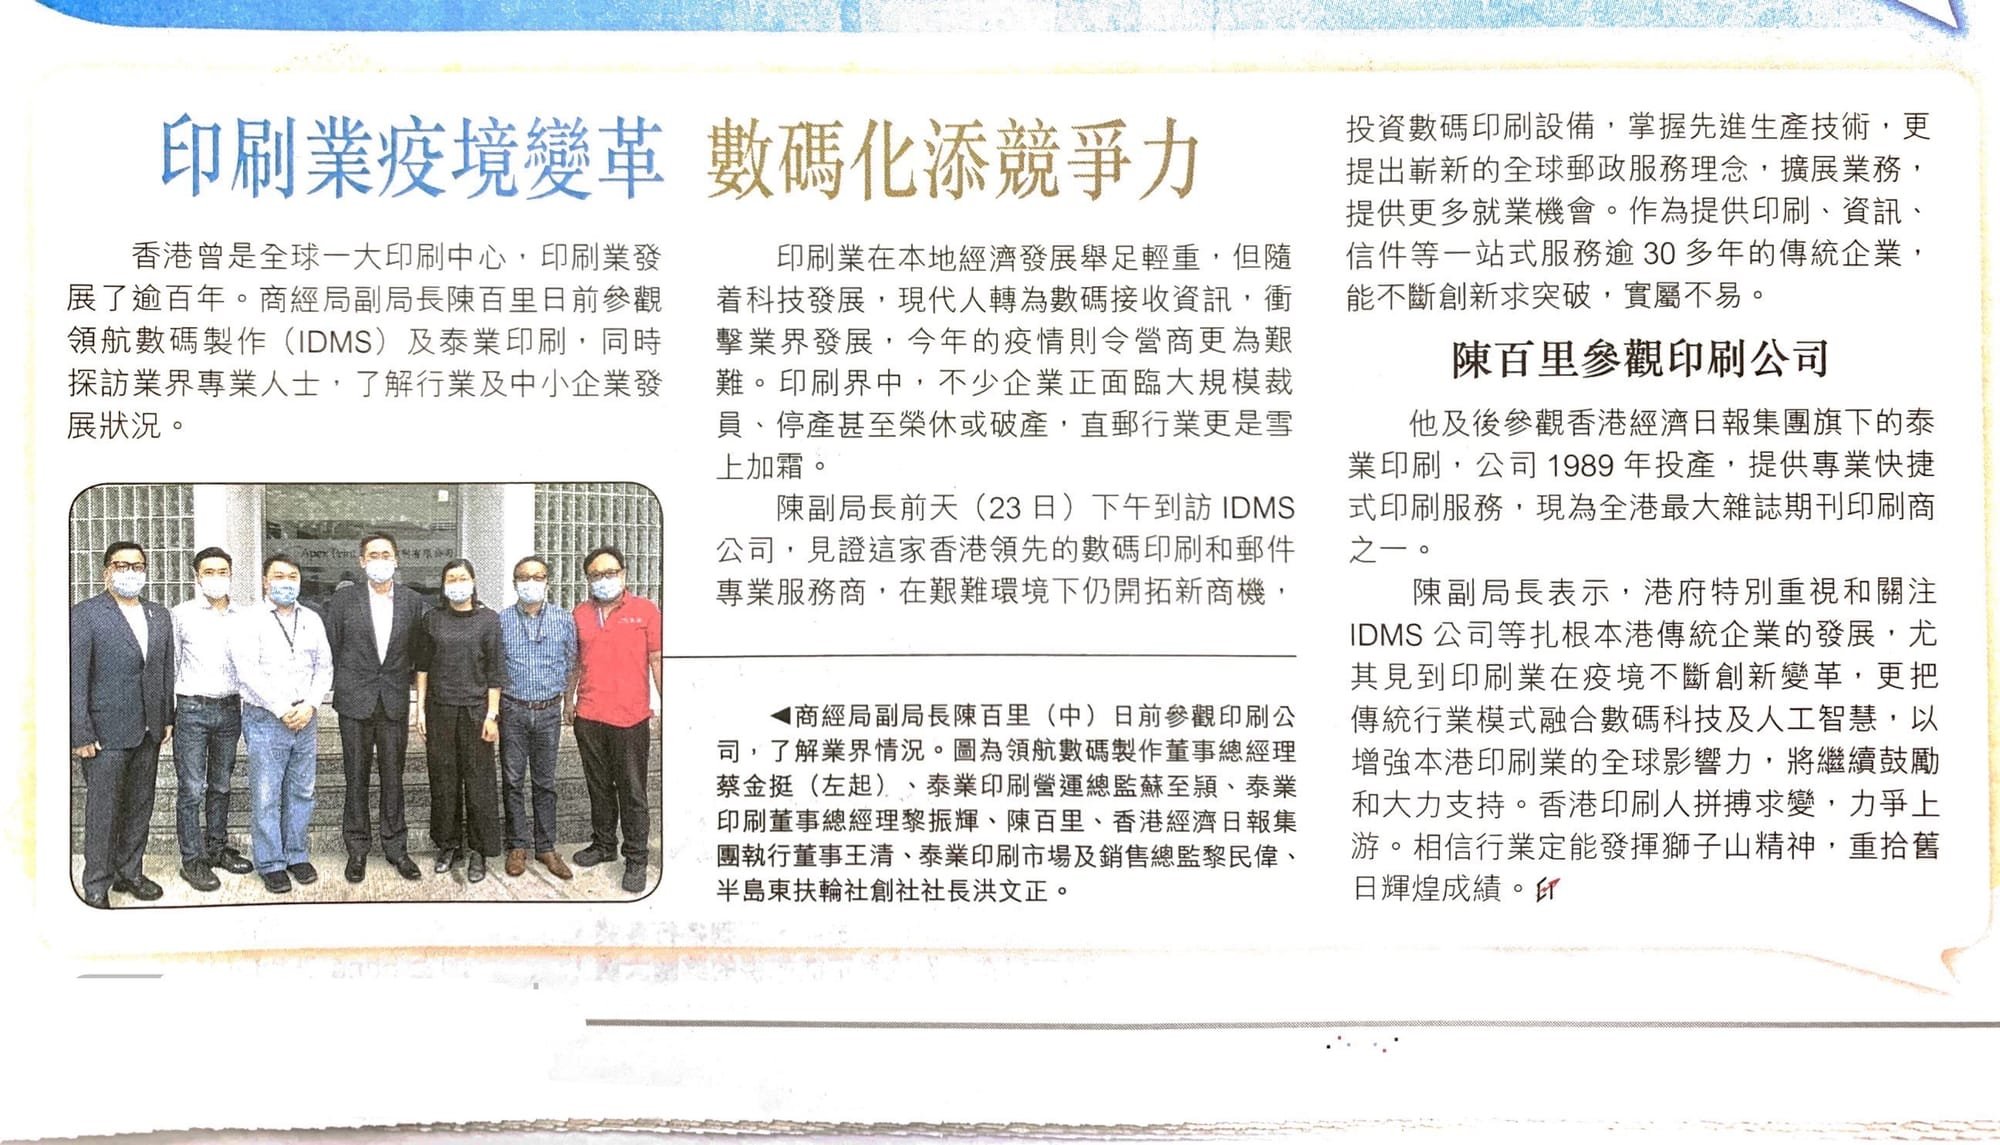 【Mr. Bernard Chan Pak-li, the Vice Secretary for Commerce and Economic Development, visited IDMS, reported by HKET】